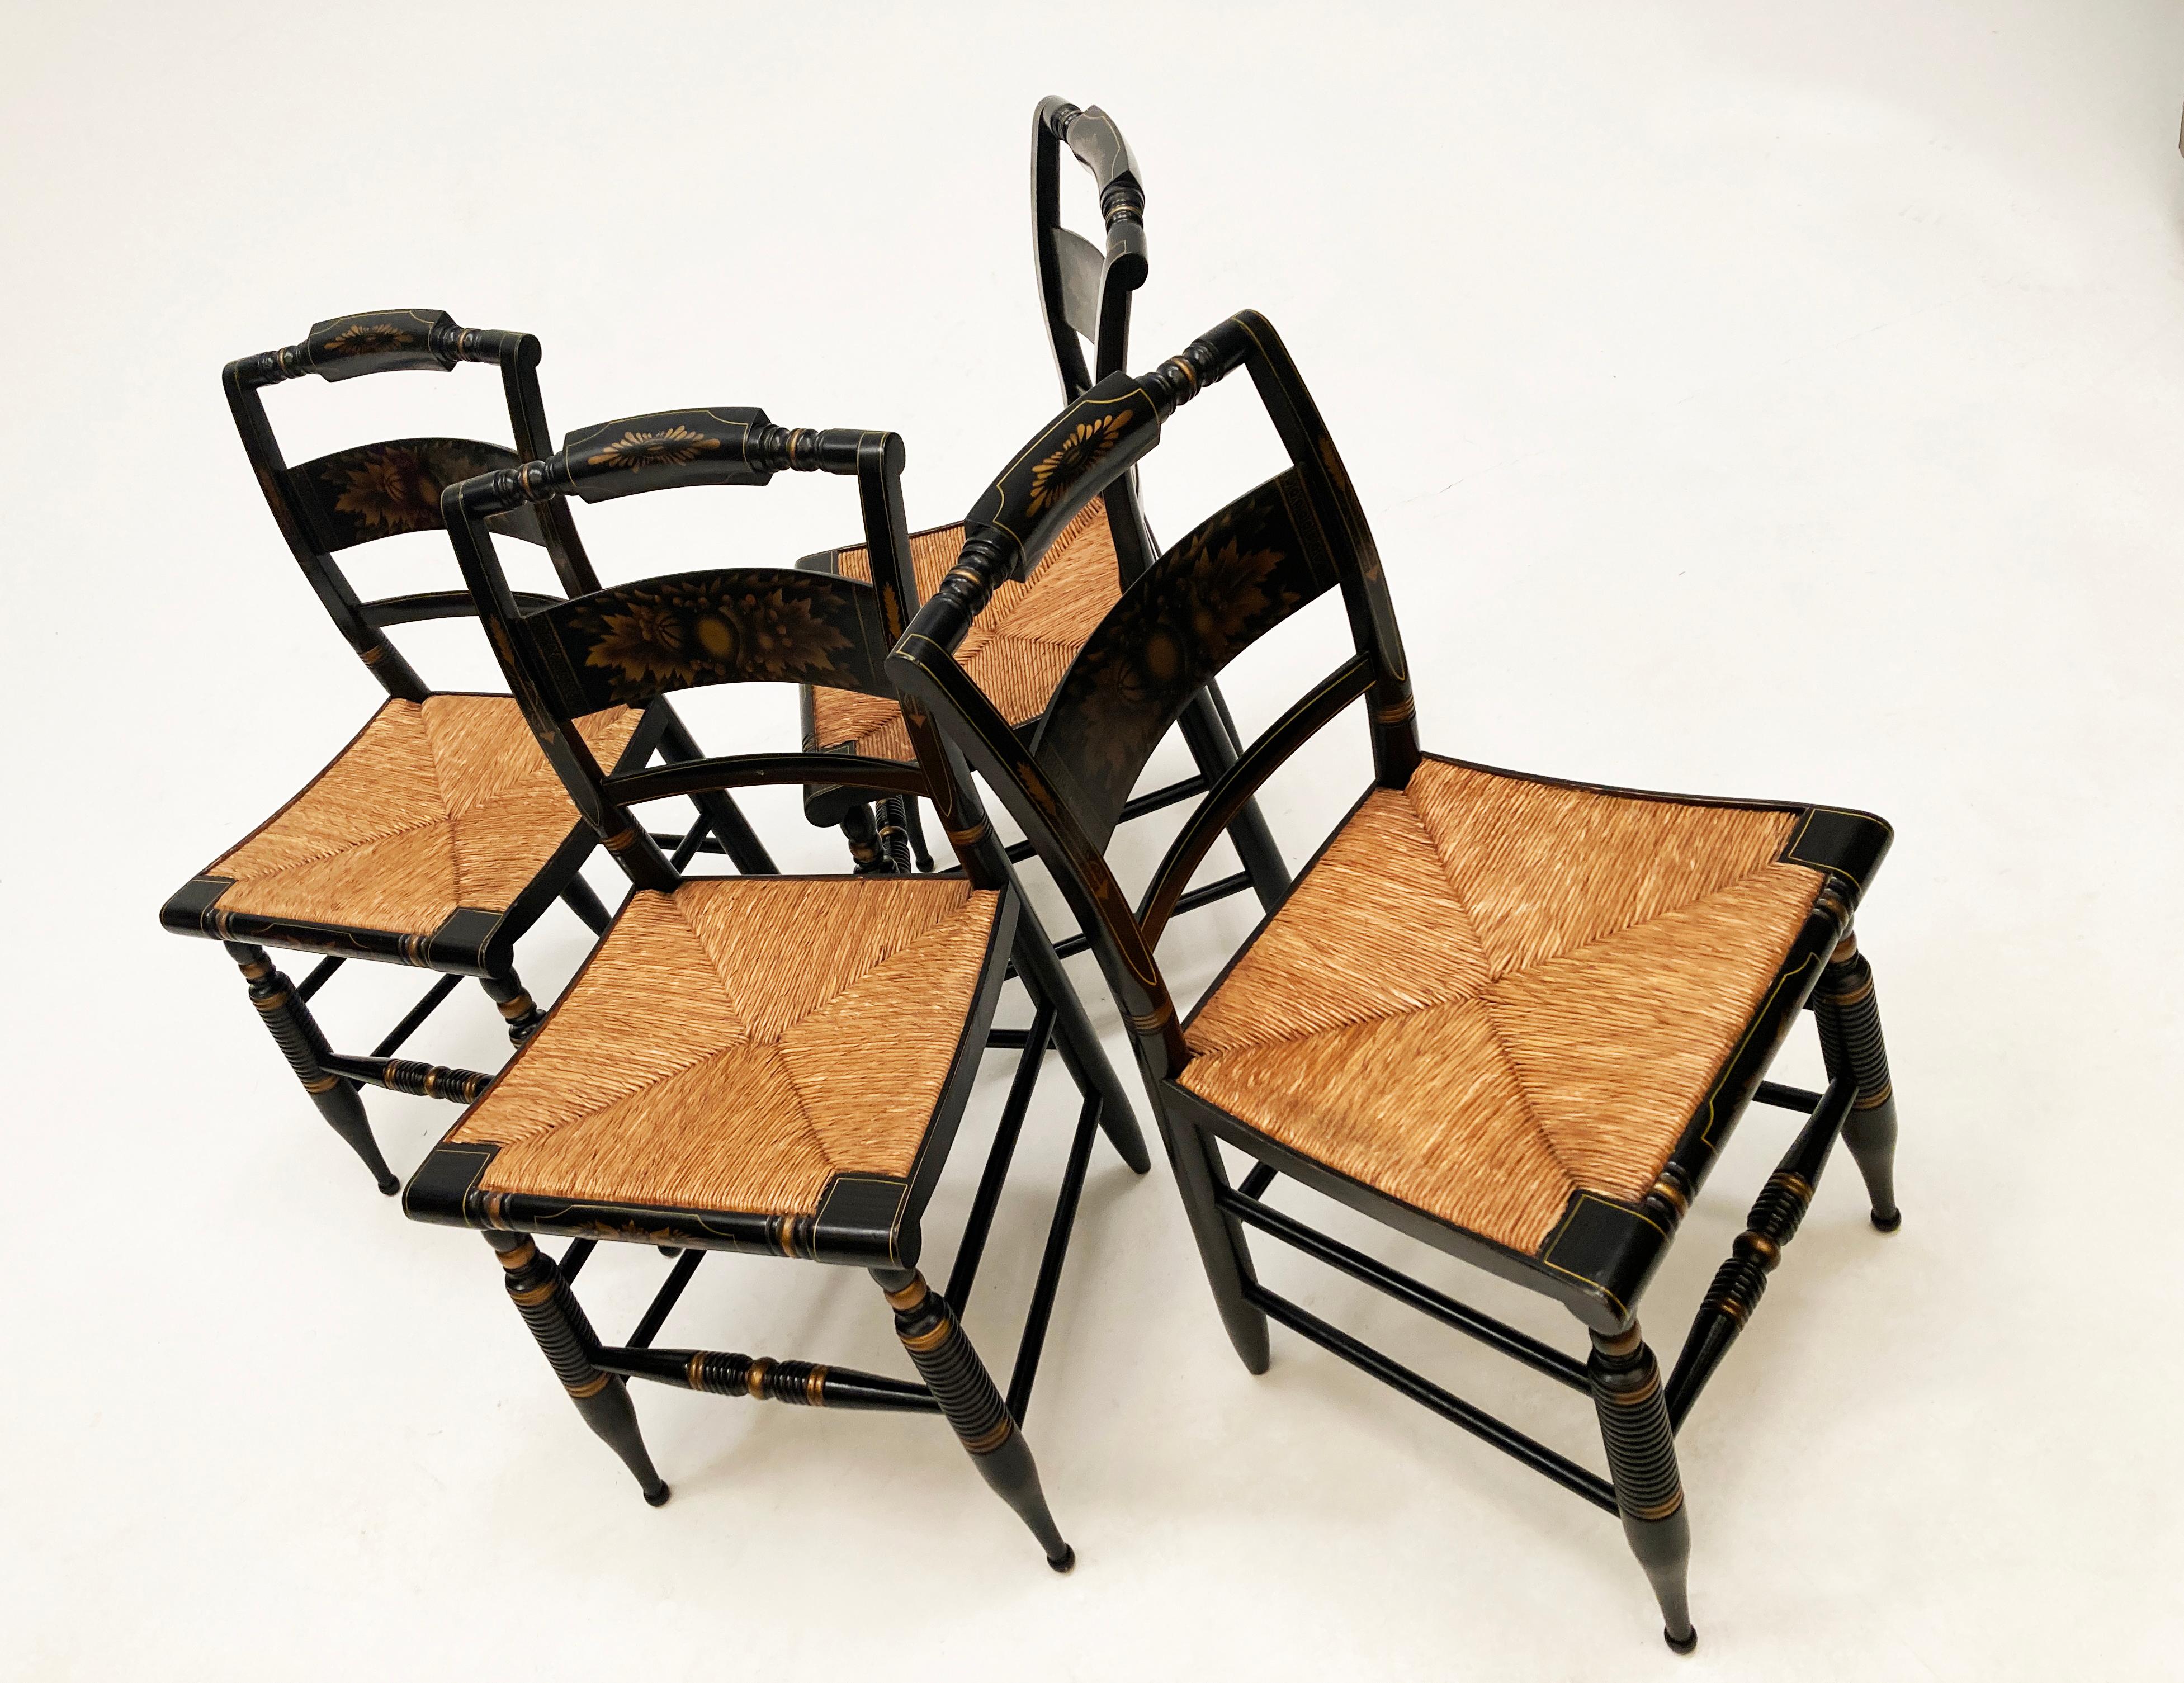 Mid 20th Century Black harvest  dining chairs, set of 4 by L. Hitchcock, Hitchcock Chair Company out of Connecticut. Just as one would expect with Hitchcock chairs, these are beautiful! With the beautiful gold harvest stenciling over the black